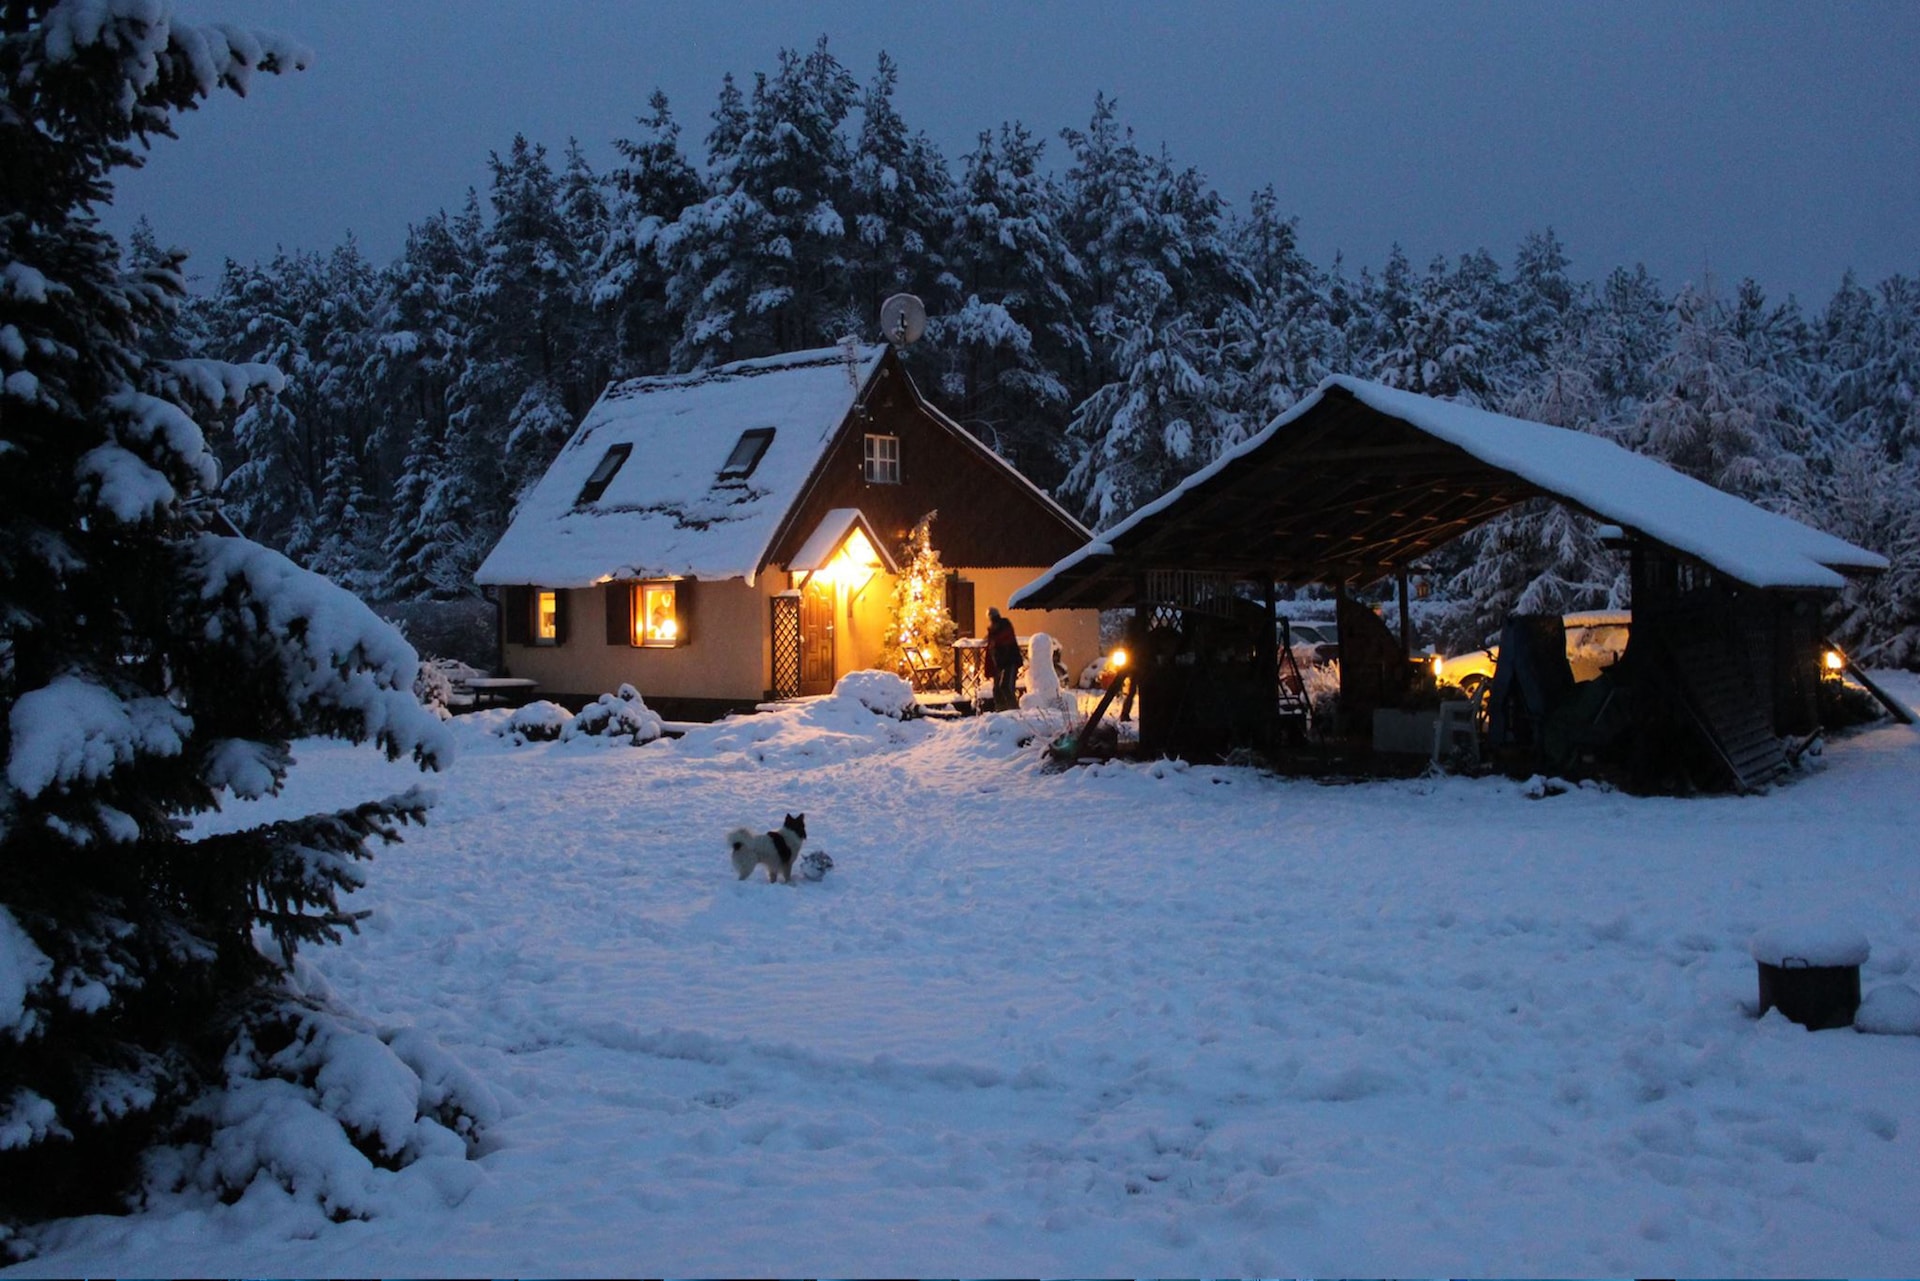 The Christmas Eve in Poland is all about waiting for the first star in the comfort of a home.